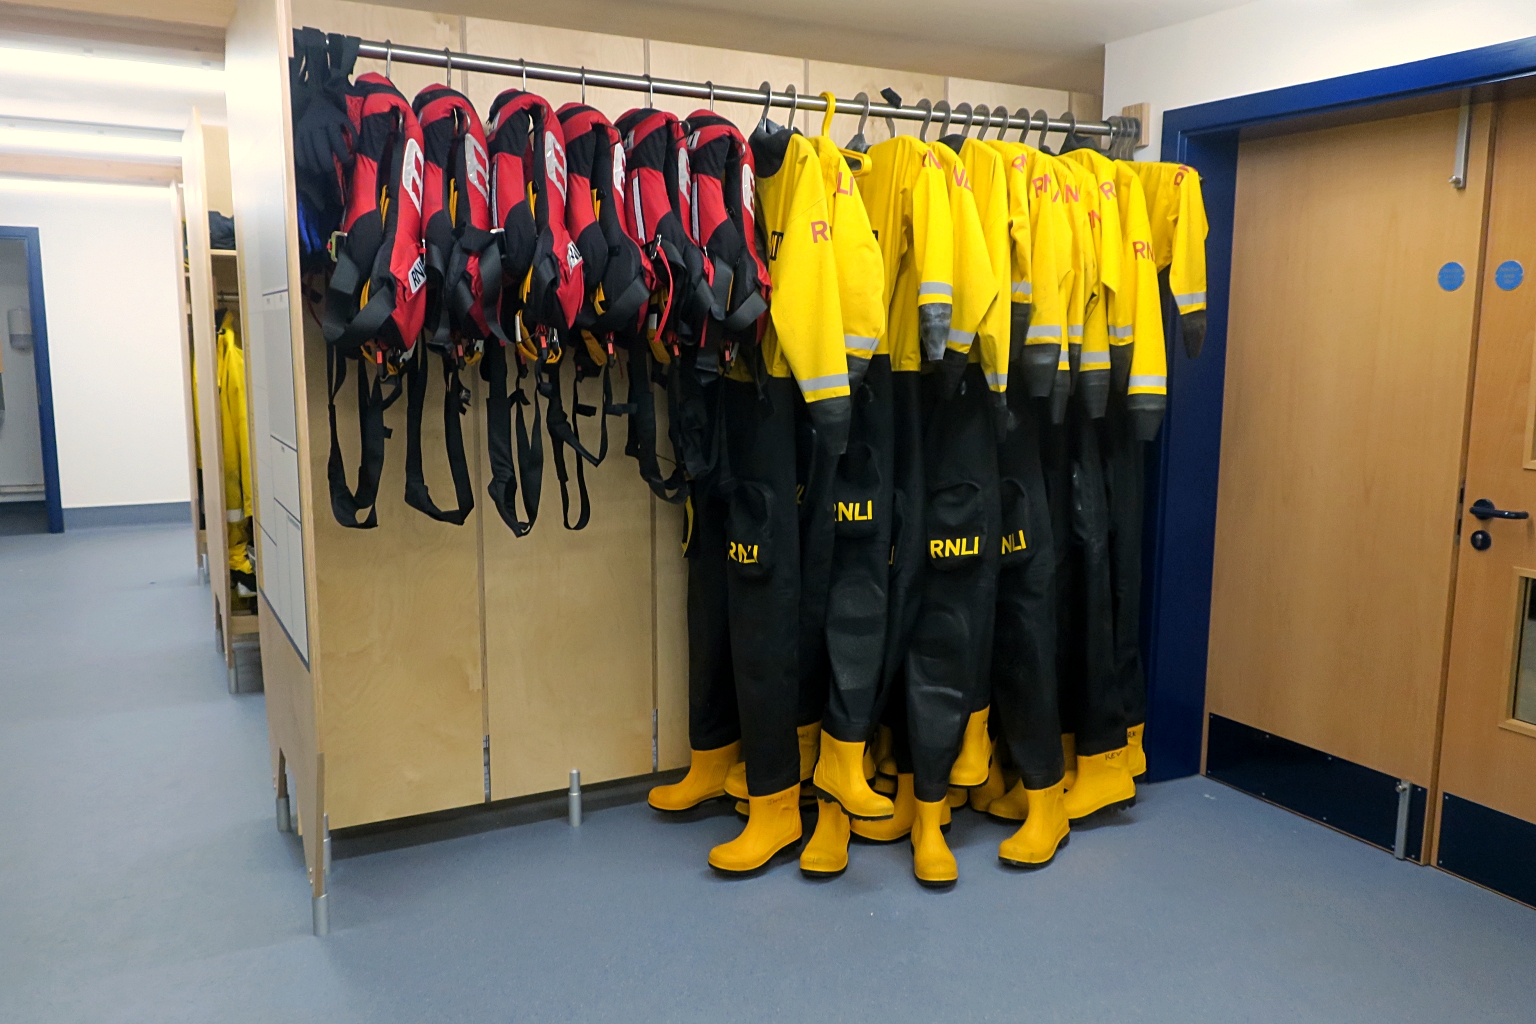 Inshore lifeboat crew drysuits and lifejackets in the changing room